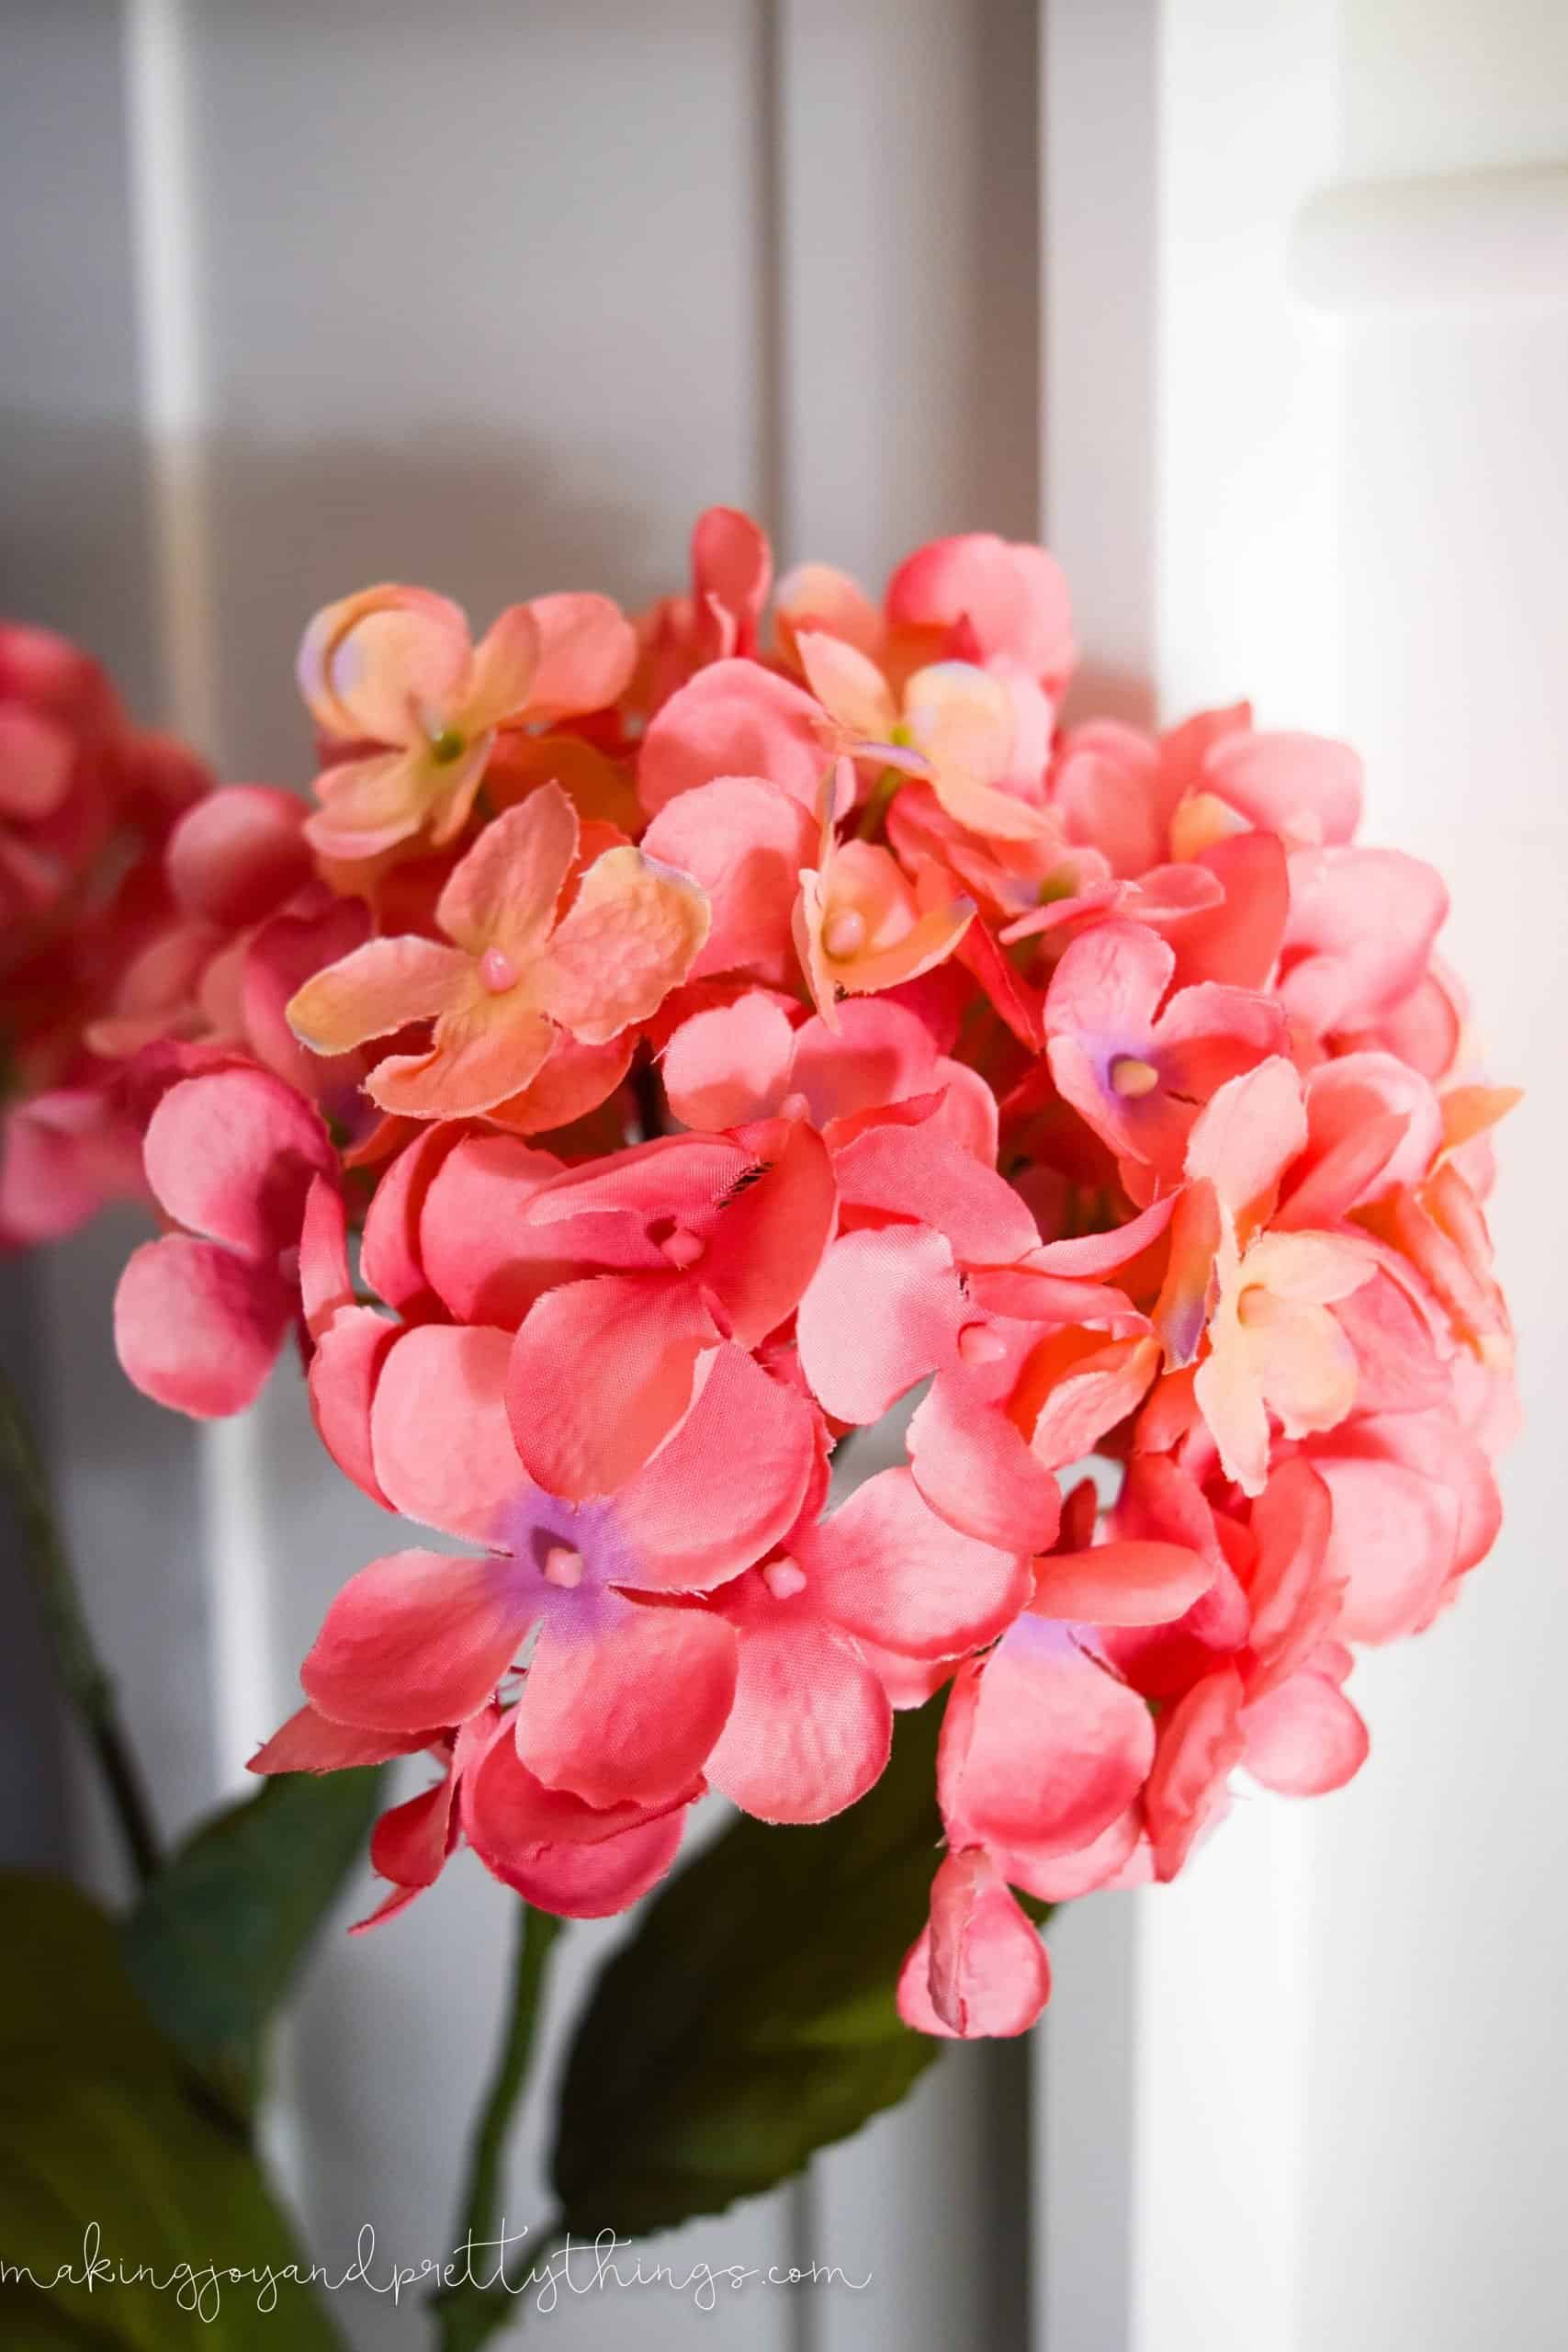 A close up look at the bright pink hydrangea blooms on our summer living room mantle.